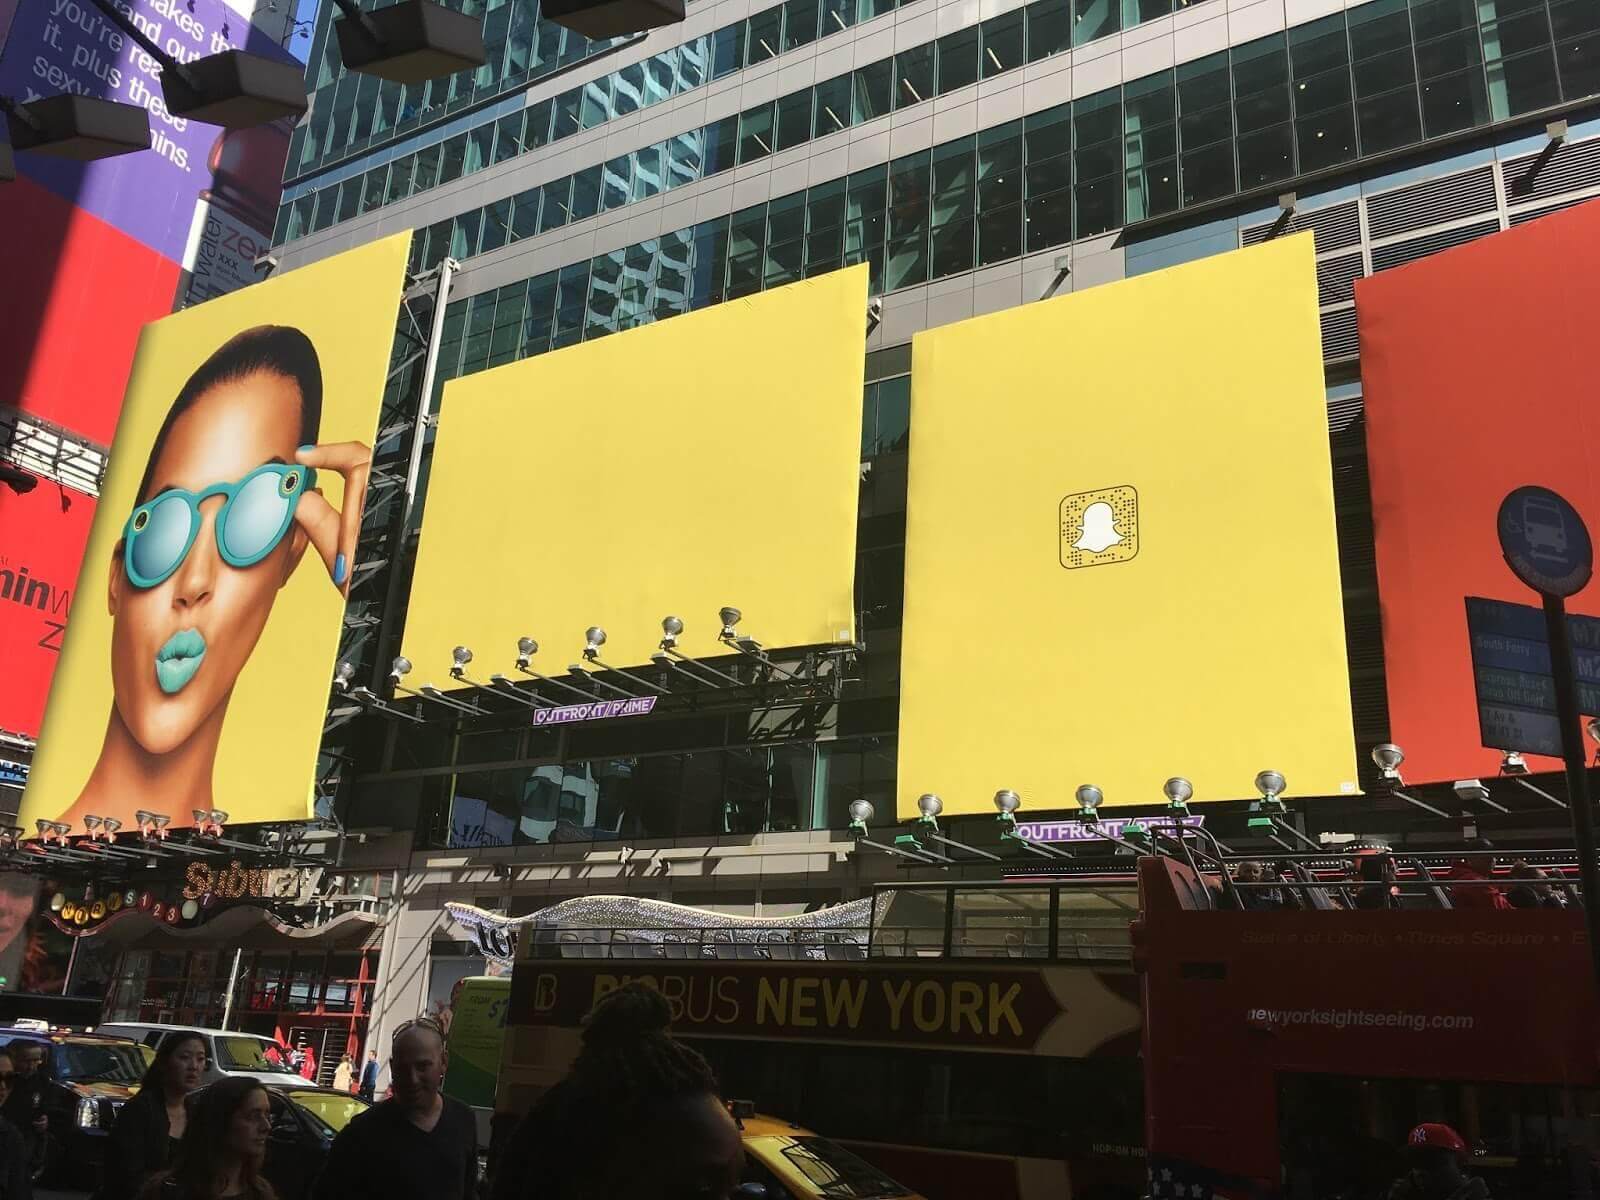 These Snapchat ads in Times Square do more than just turn head, they create lasting impressions